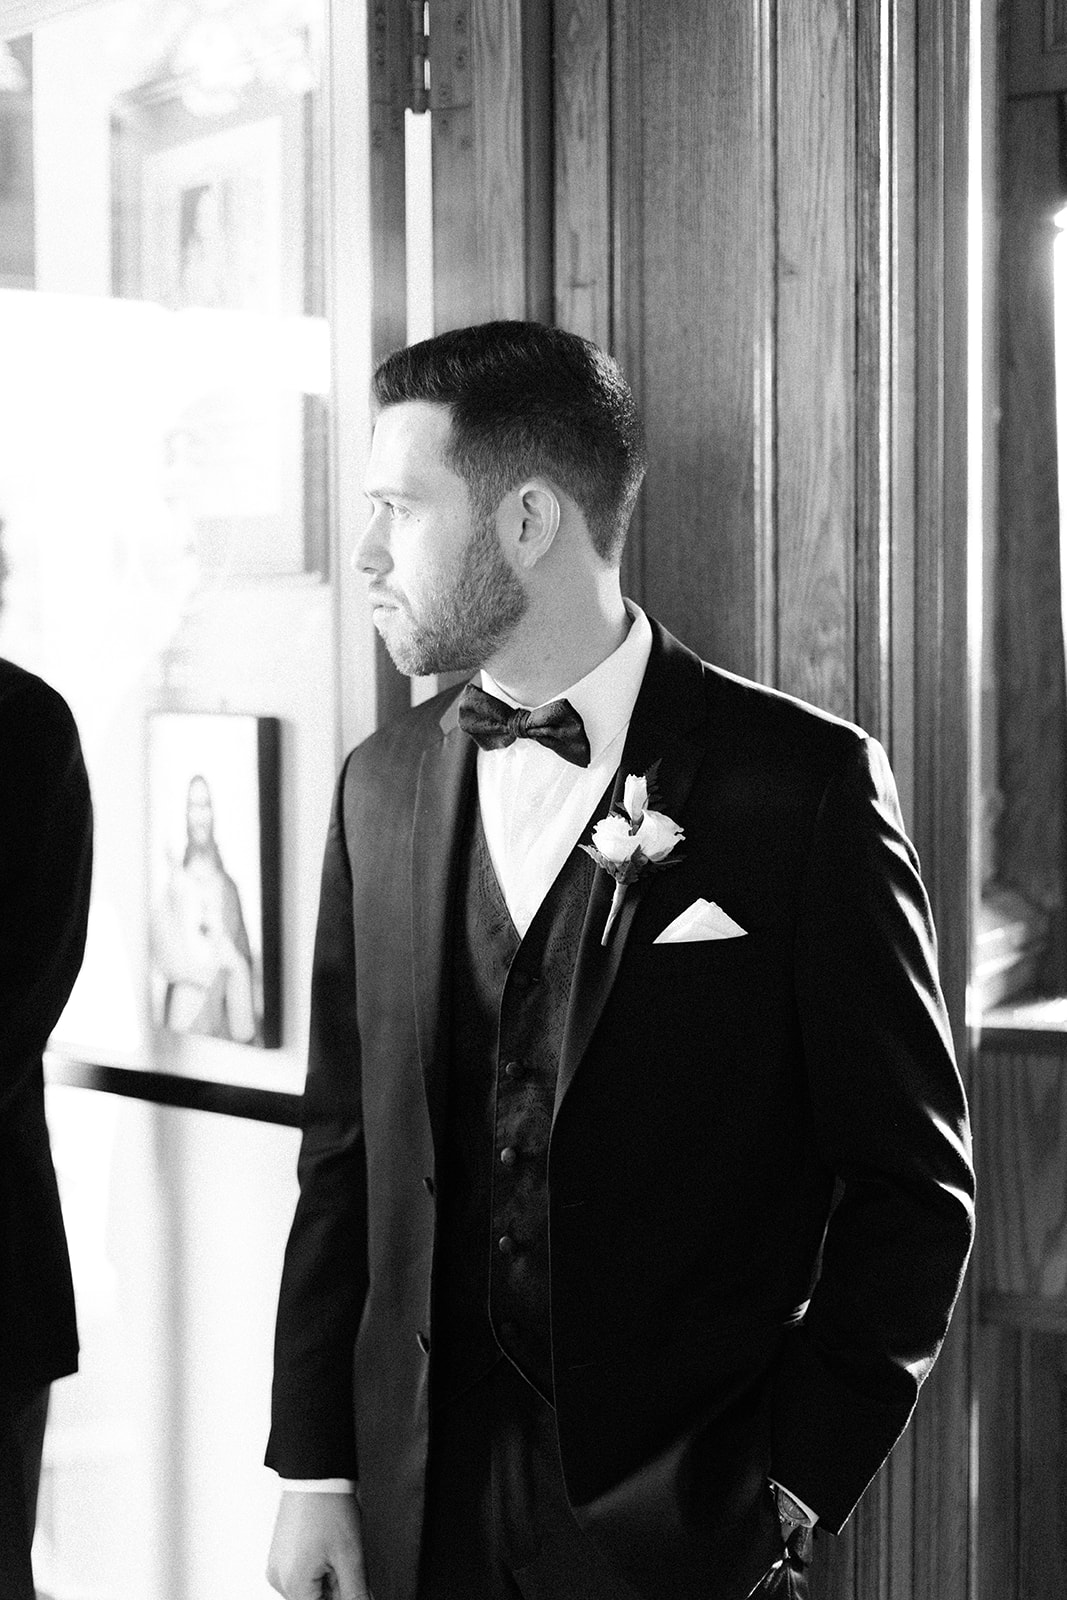 Pennsylvania wedding photographer captures black and white portrait of groom looking into wedding ceremony space